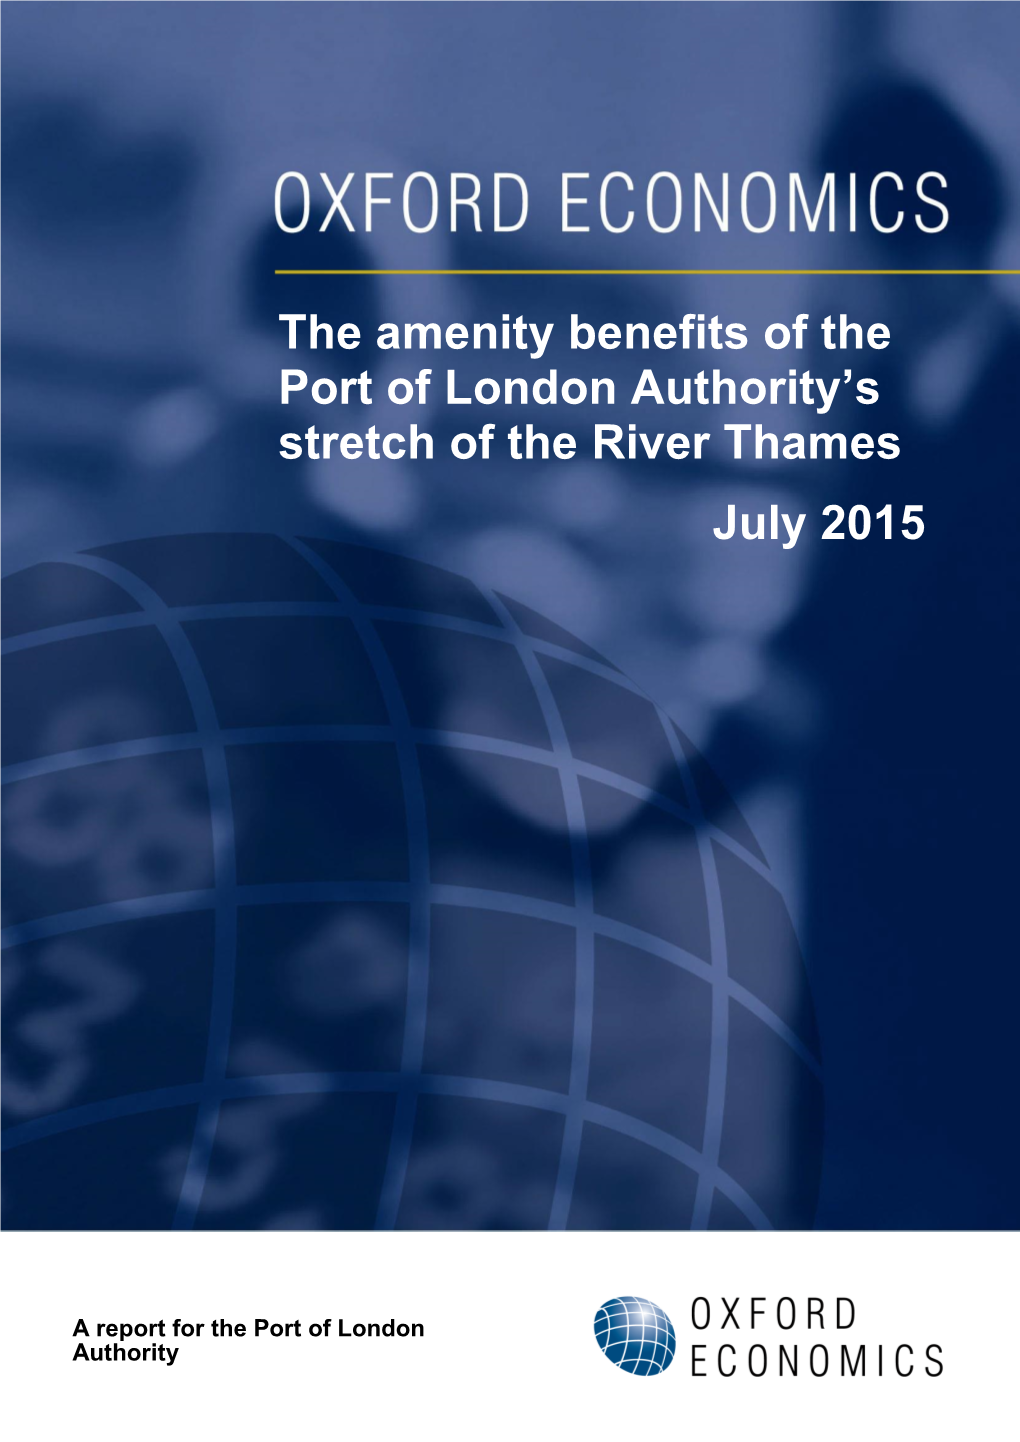 The Amenity Benefits of the Port of London Authority's Stretch of the River Thames July 2015